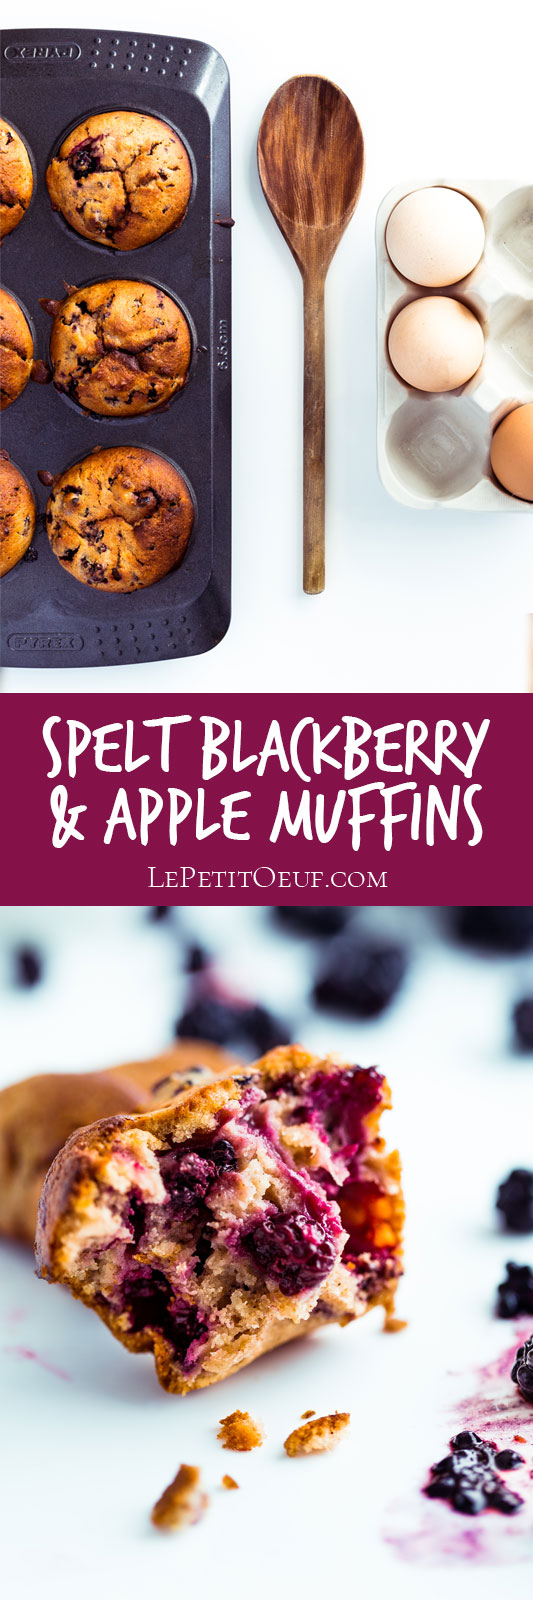 Soft and tender spelt blackberry and apple muffins, a recipe created from seasonal fruit picked directly from the plant, a dairy-free recipe using delicious spelt flour and the perfect natural pairing of blackberries and apples.